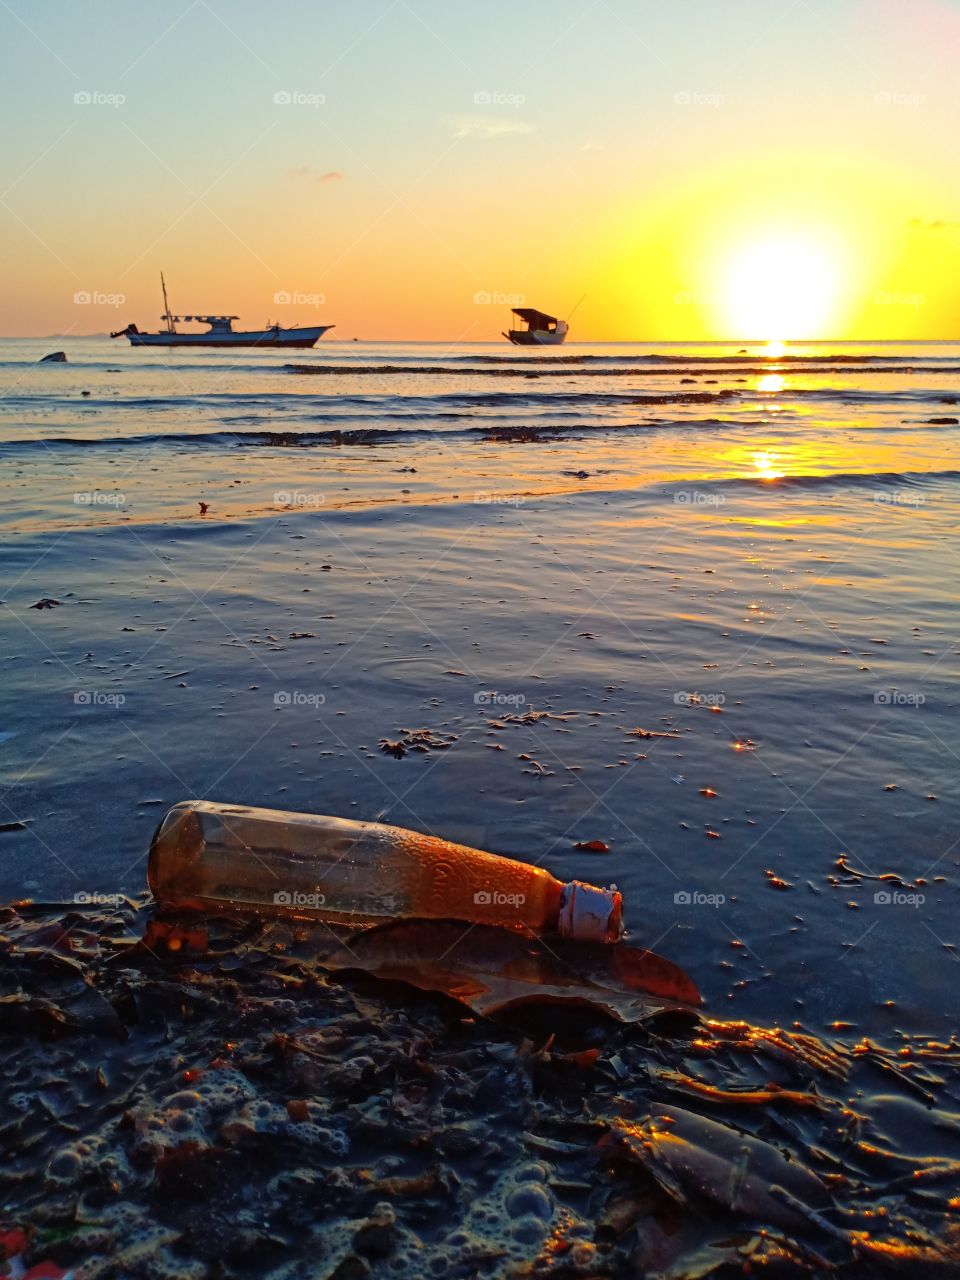 an abandoned glass bottle on the beach and beautiful gold colorful sunset. keep the beach clean will save the marine life.